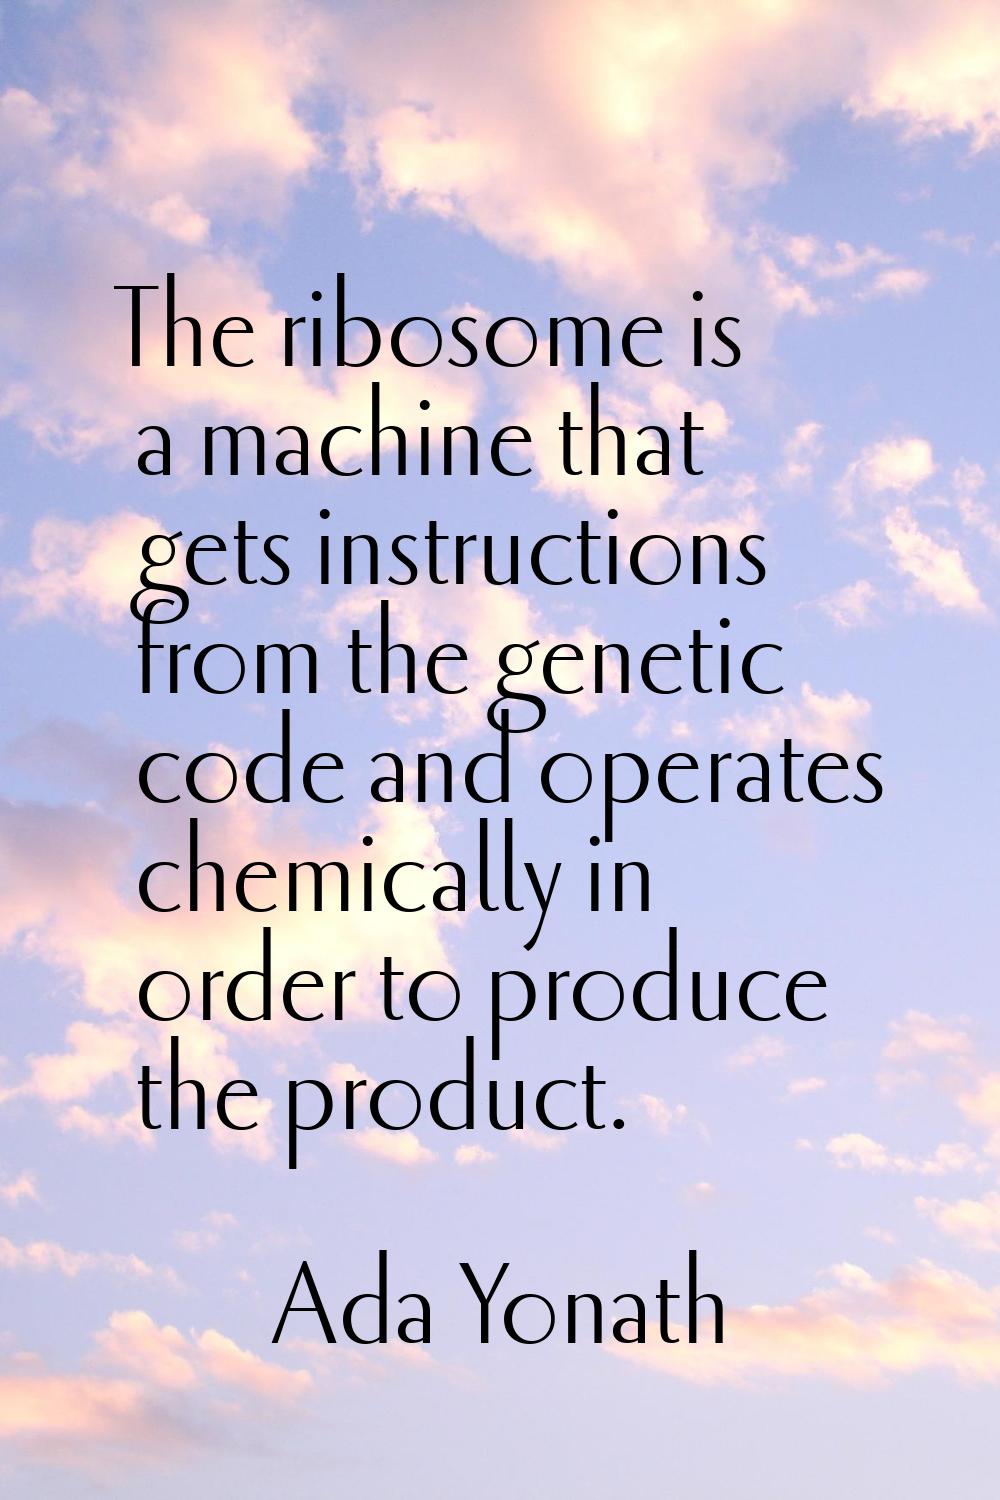 The ribosome is a machine that gets instructions from the genetic code and operates chemically in o